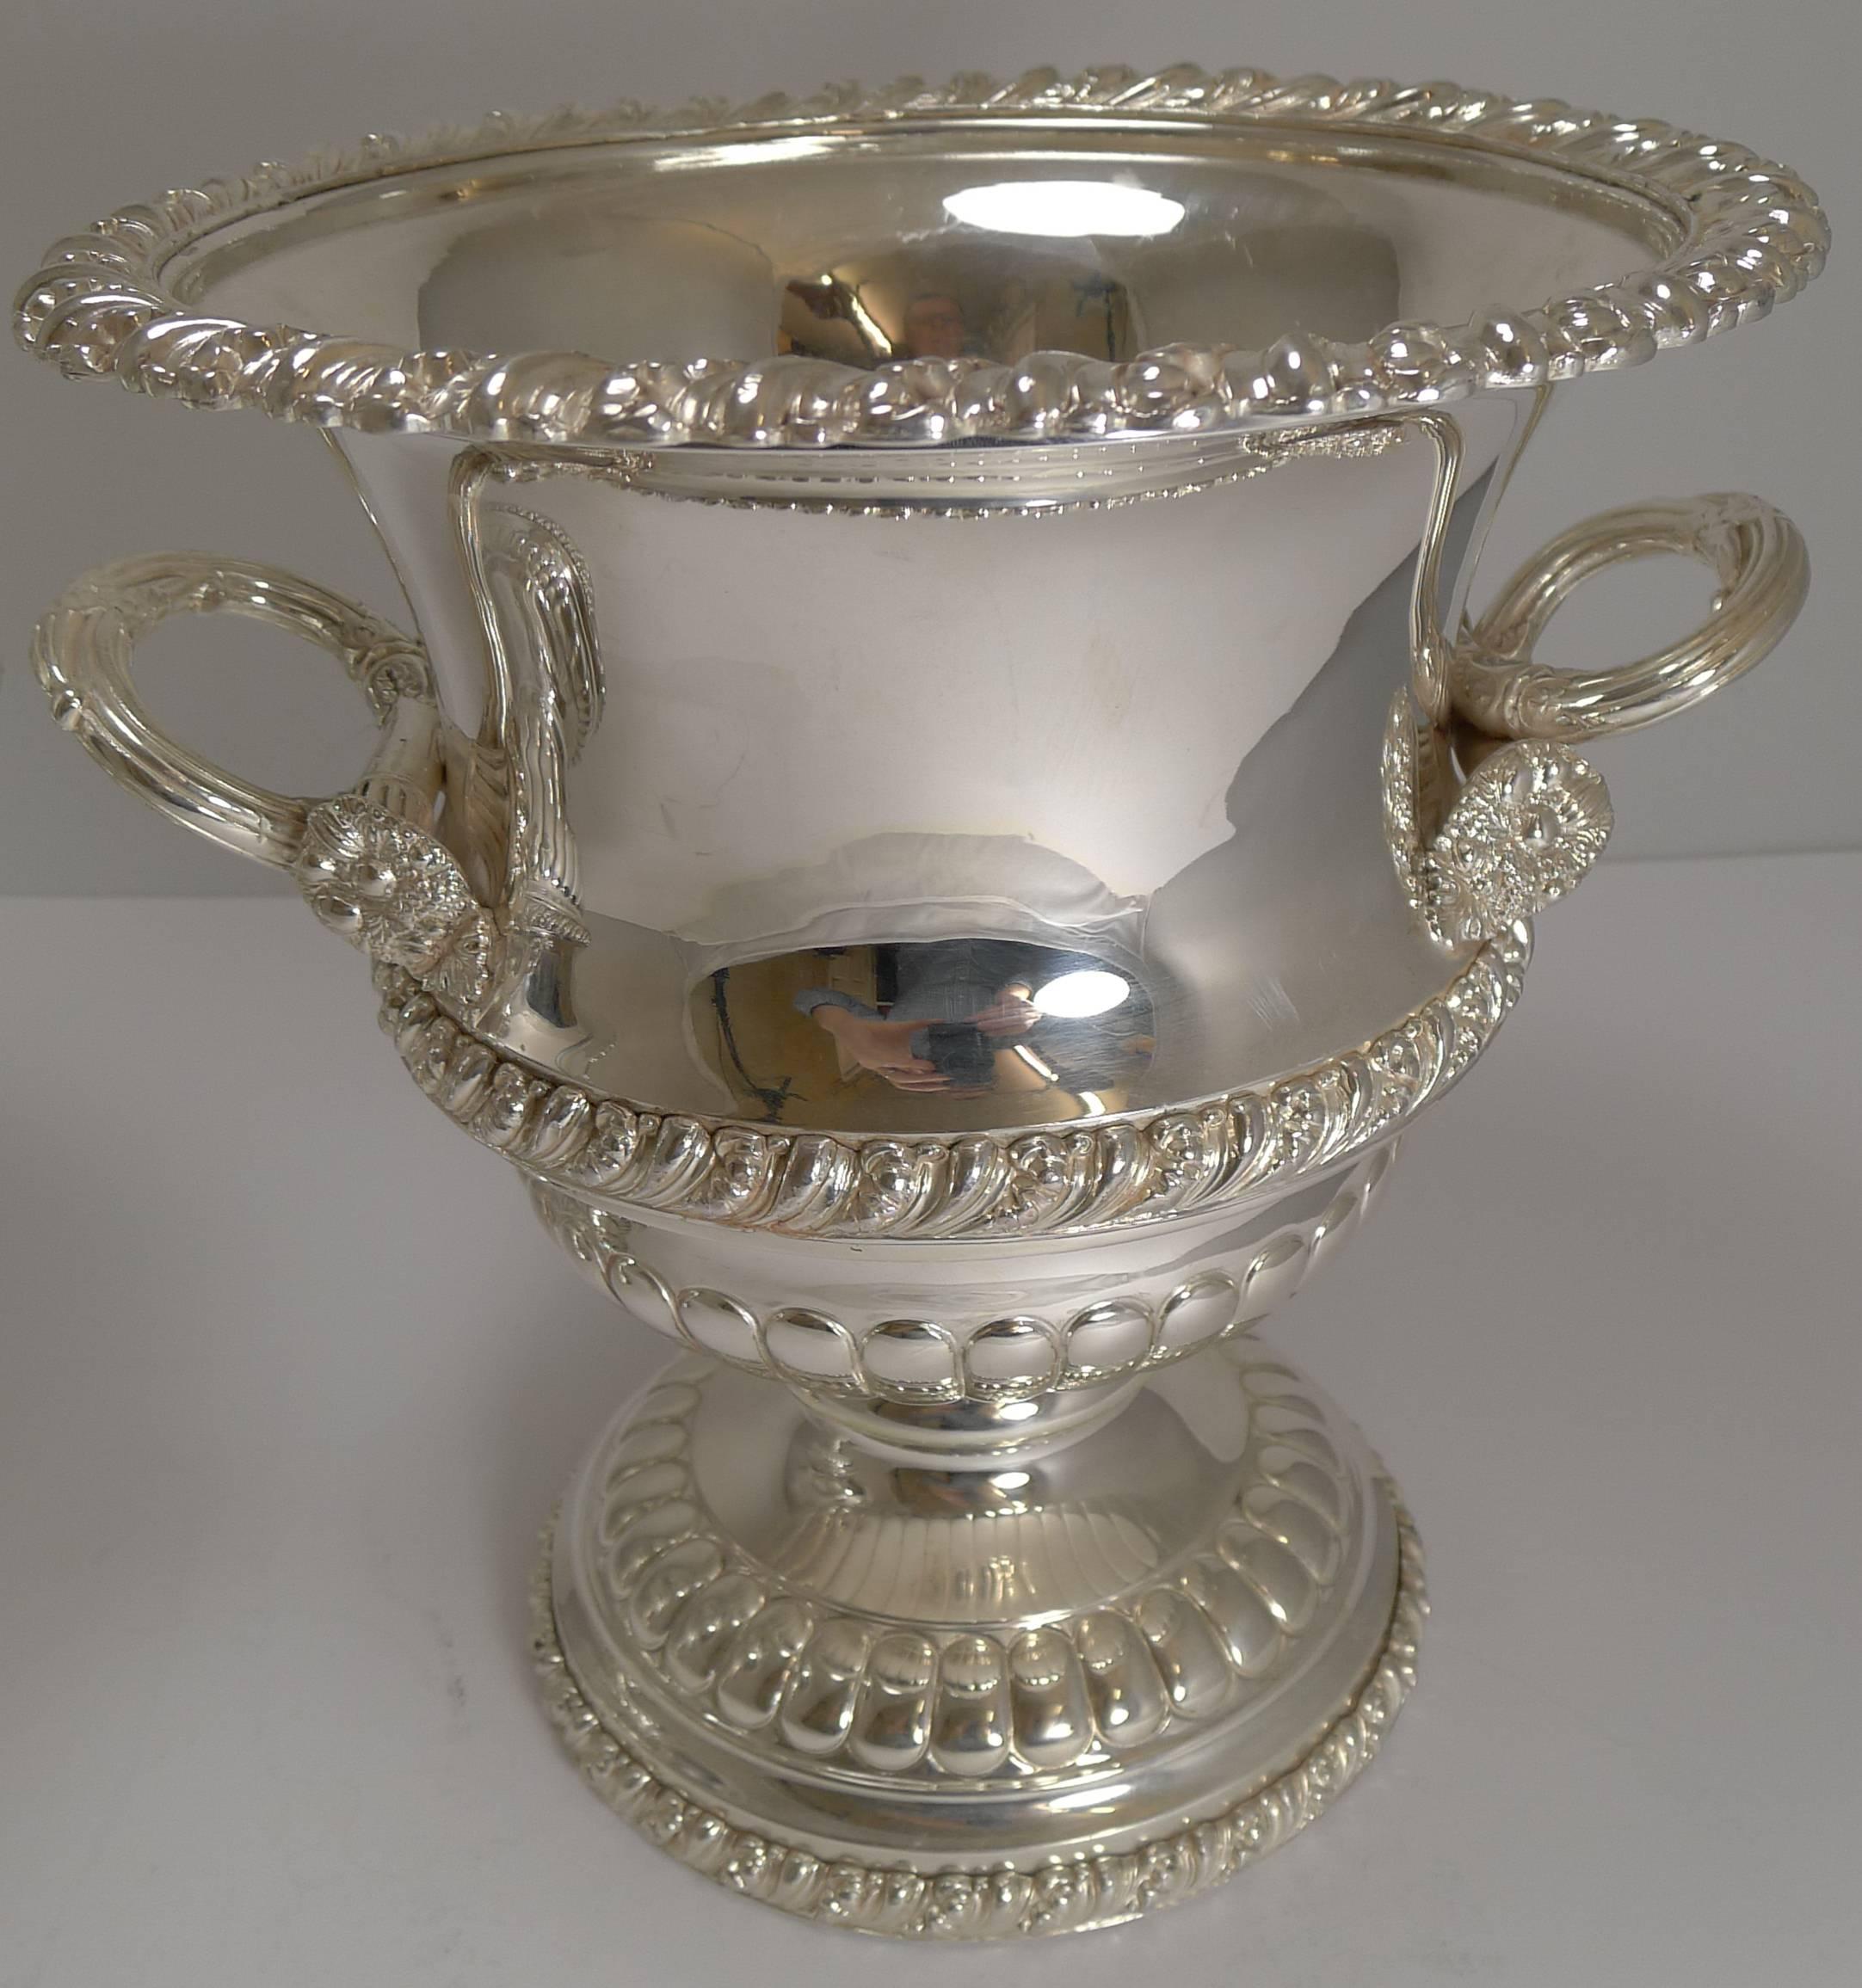 Edwardian Pair of Antique English Silver Plated Wine or Champagne Coolers, circa 1900